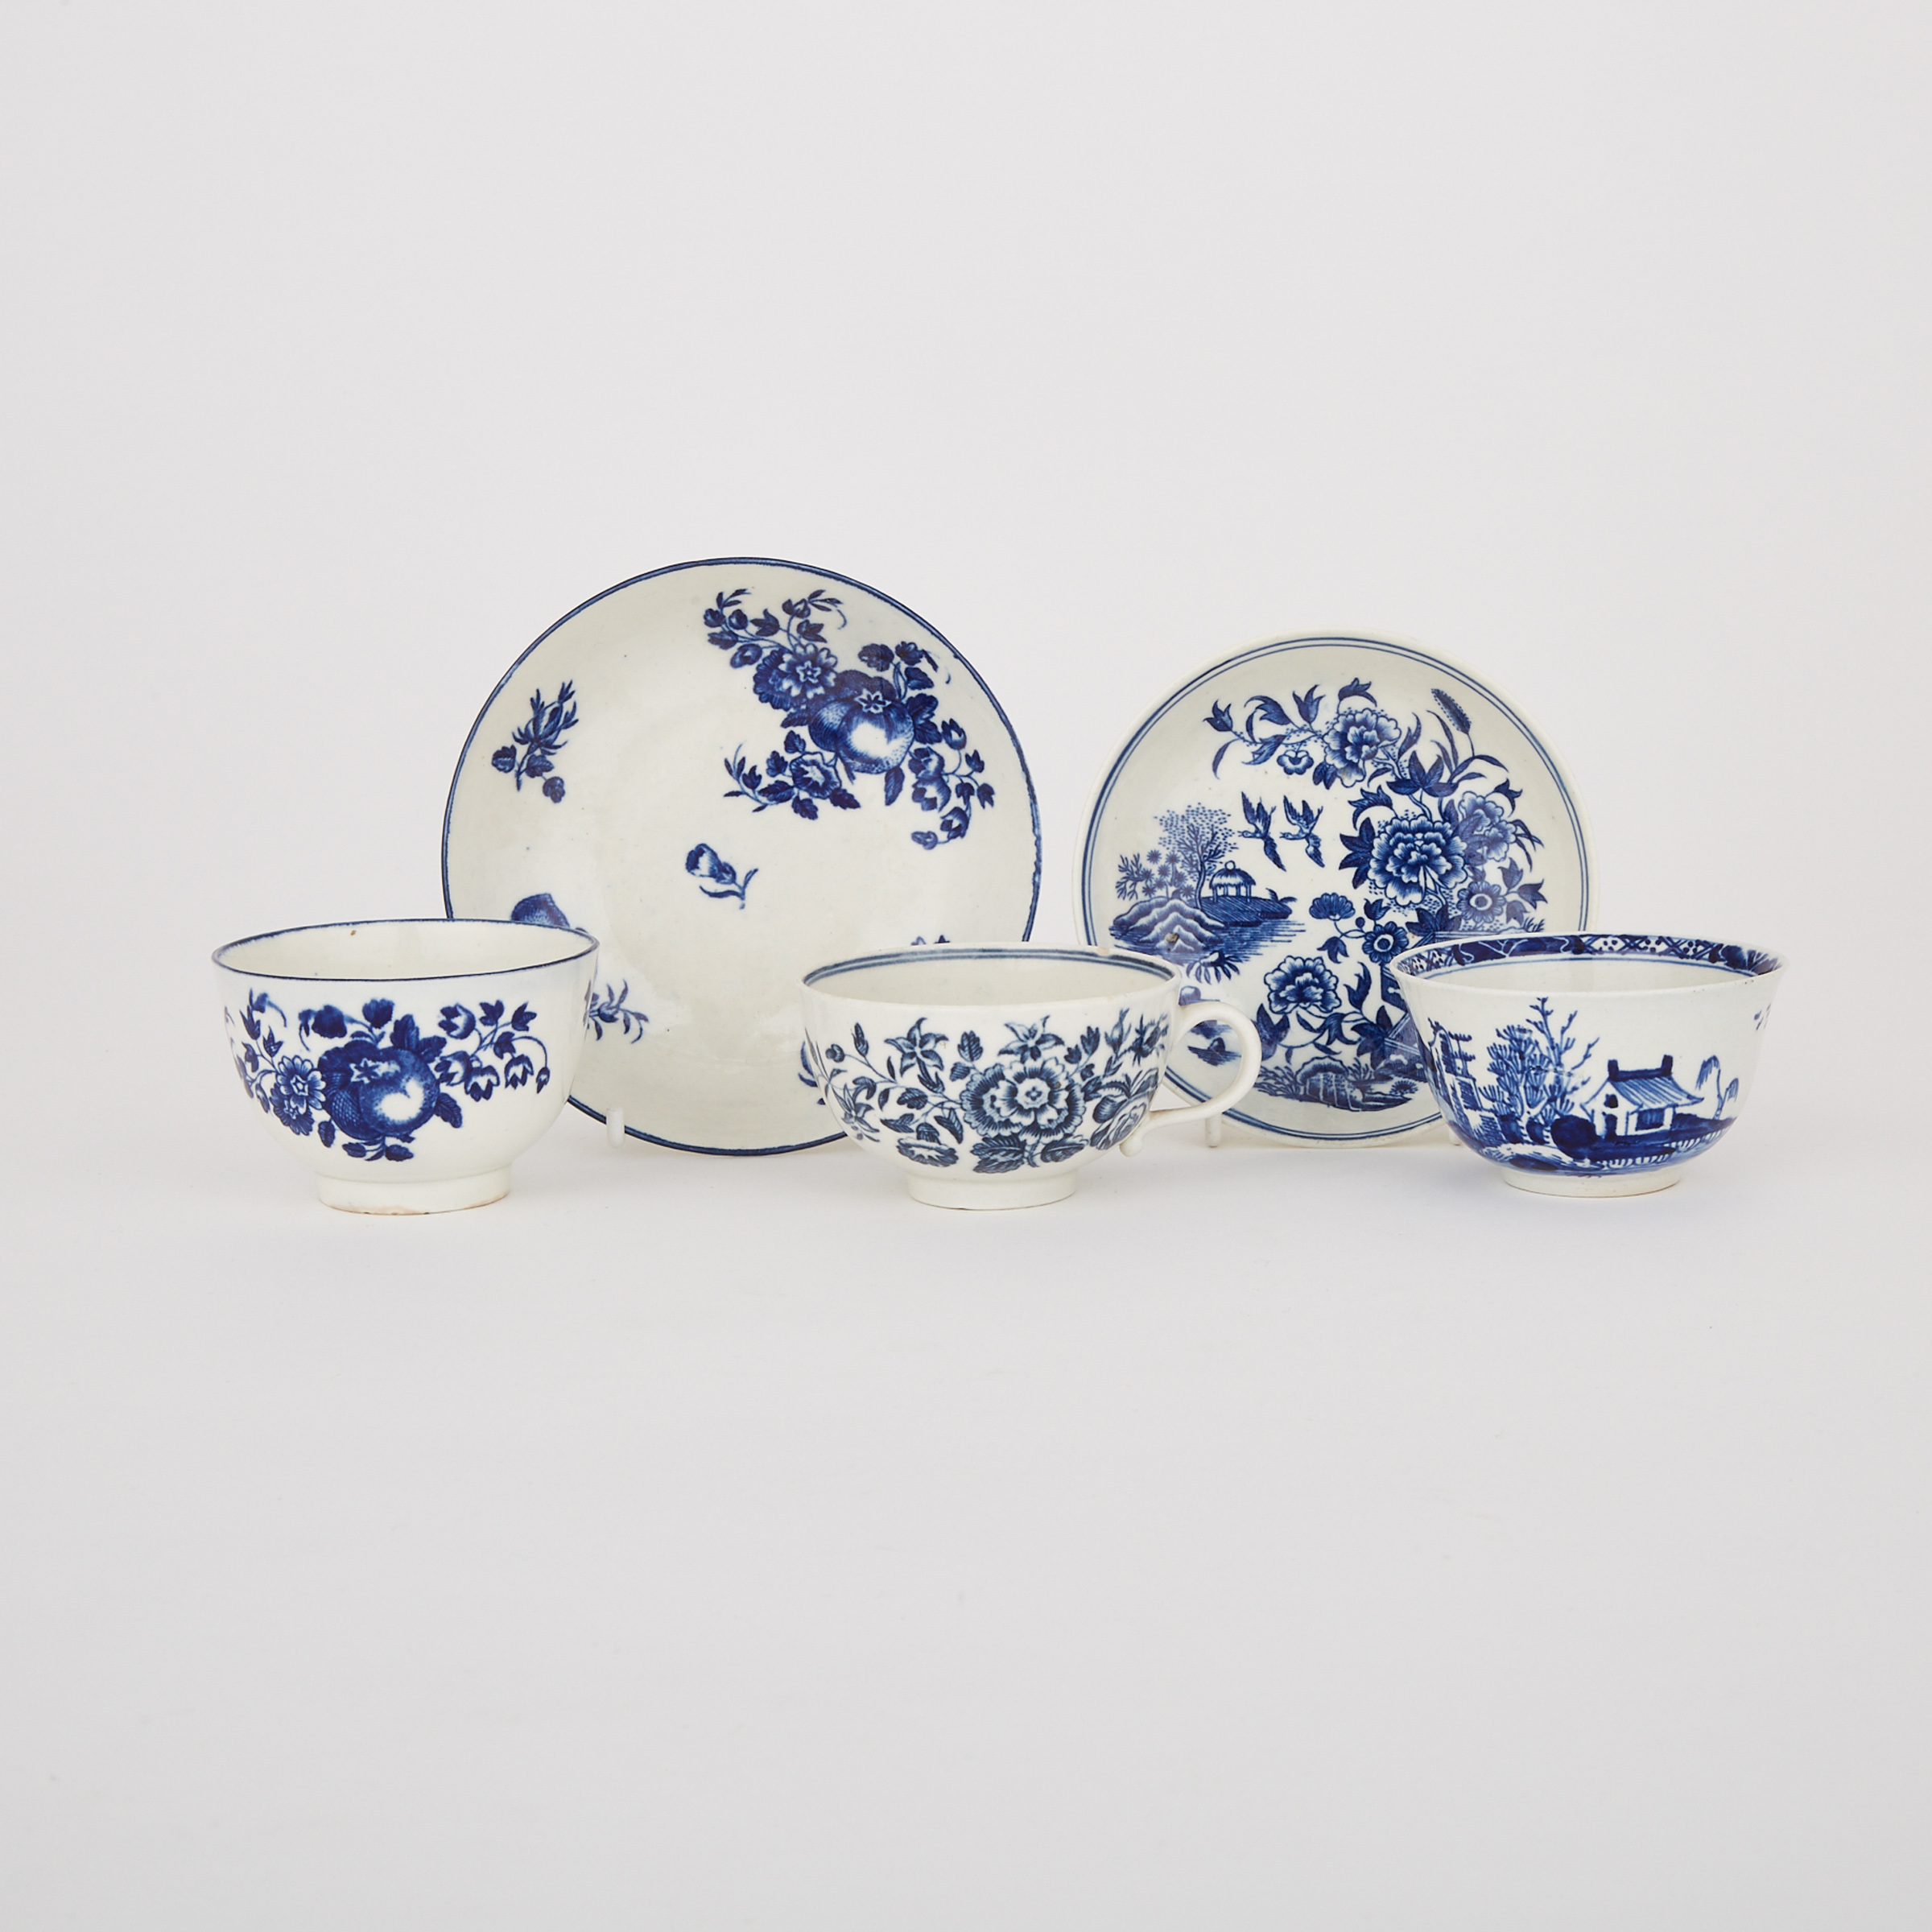 Worcester Blue Printed Tea Bowl and Saucer, Cup with a Saucer, and a Vauxhall Tea Bowl, c.1760-80